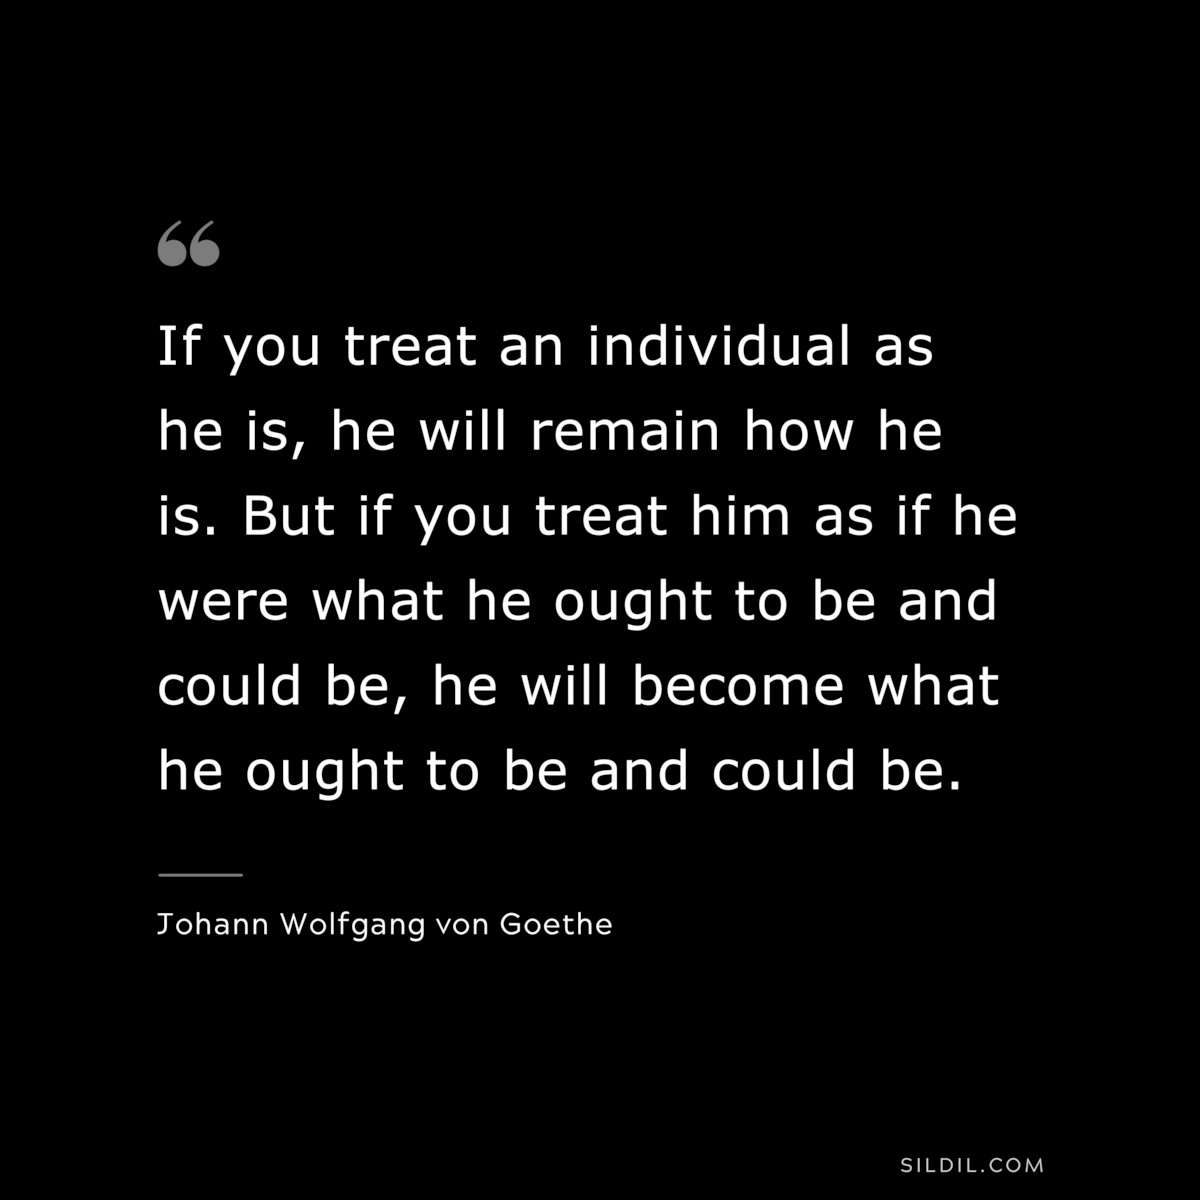 If you treat an individual as he is, he will remain how he is. But if you treat him as if he were what he ought to be and could be, he will become what he ought to be and could be.― Johann Wolfgang von Goethe